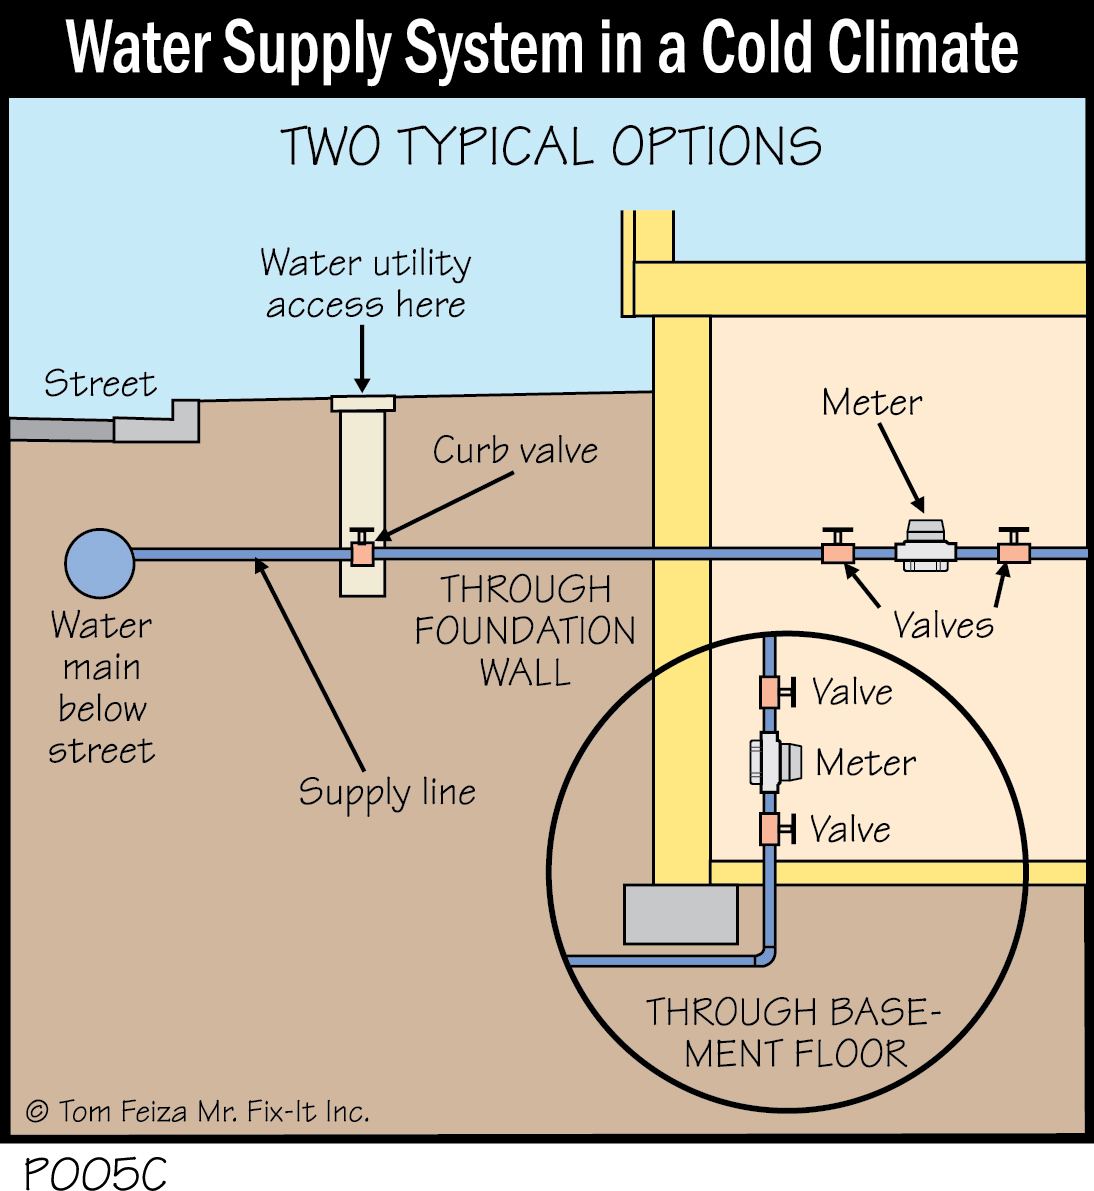 P005C - Water Supply System in a Cold Climate